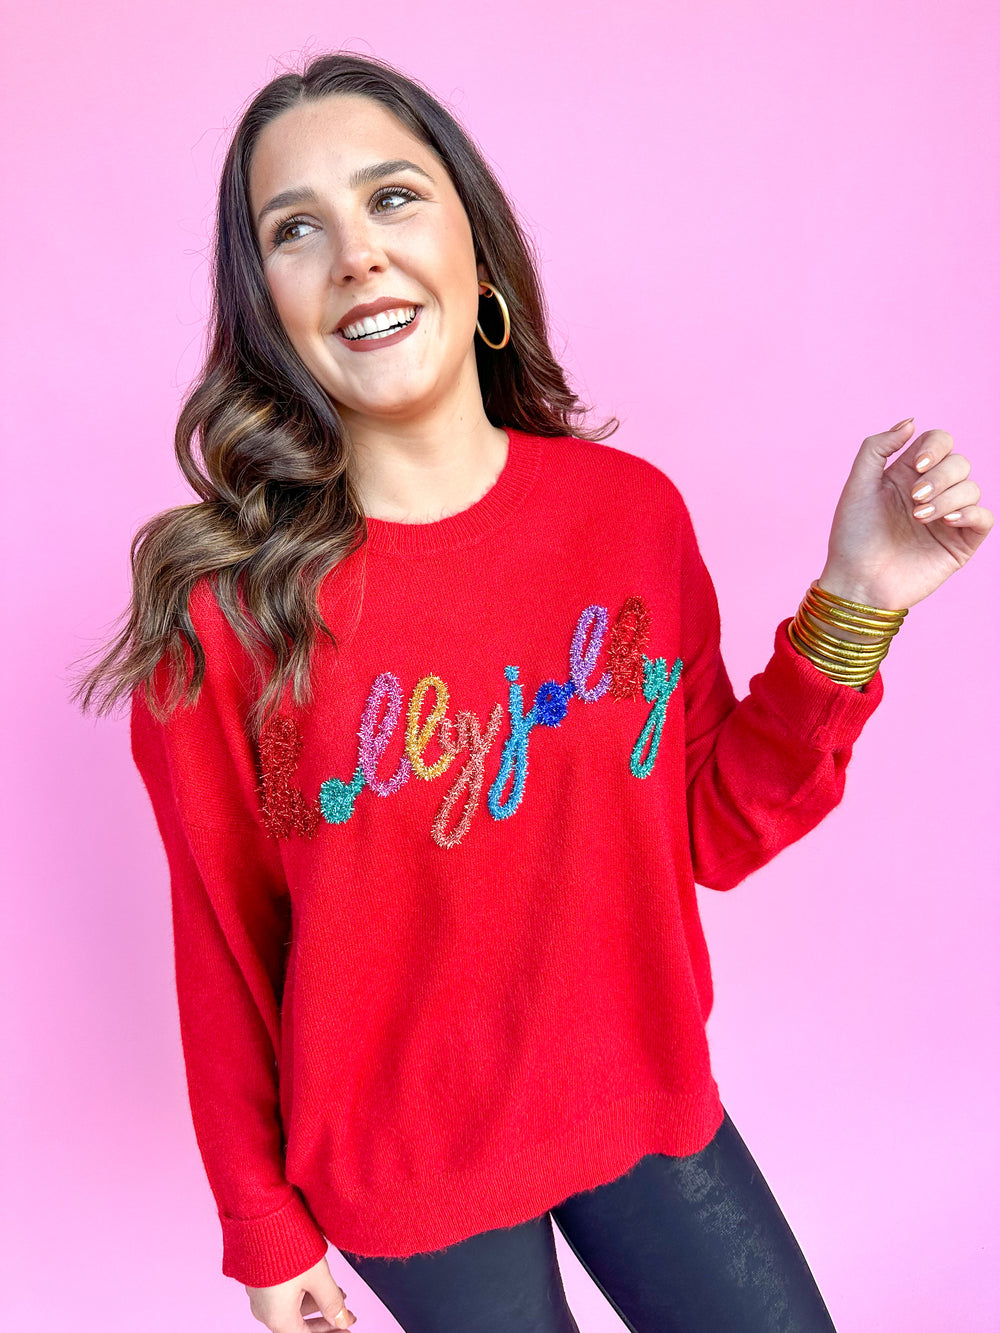 Tinsel Holly Jolly Sweater - Red